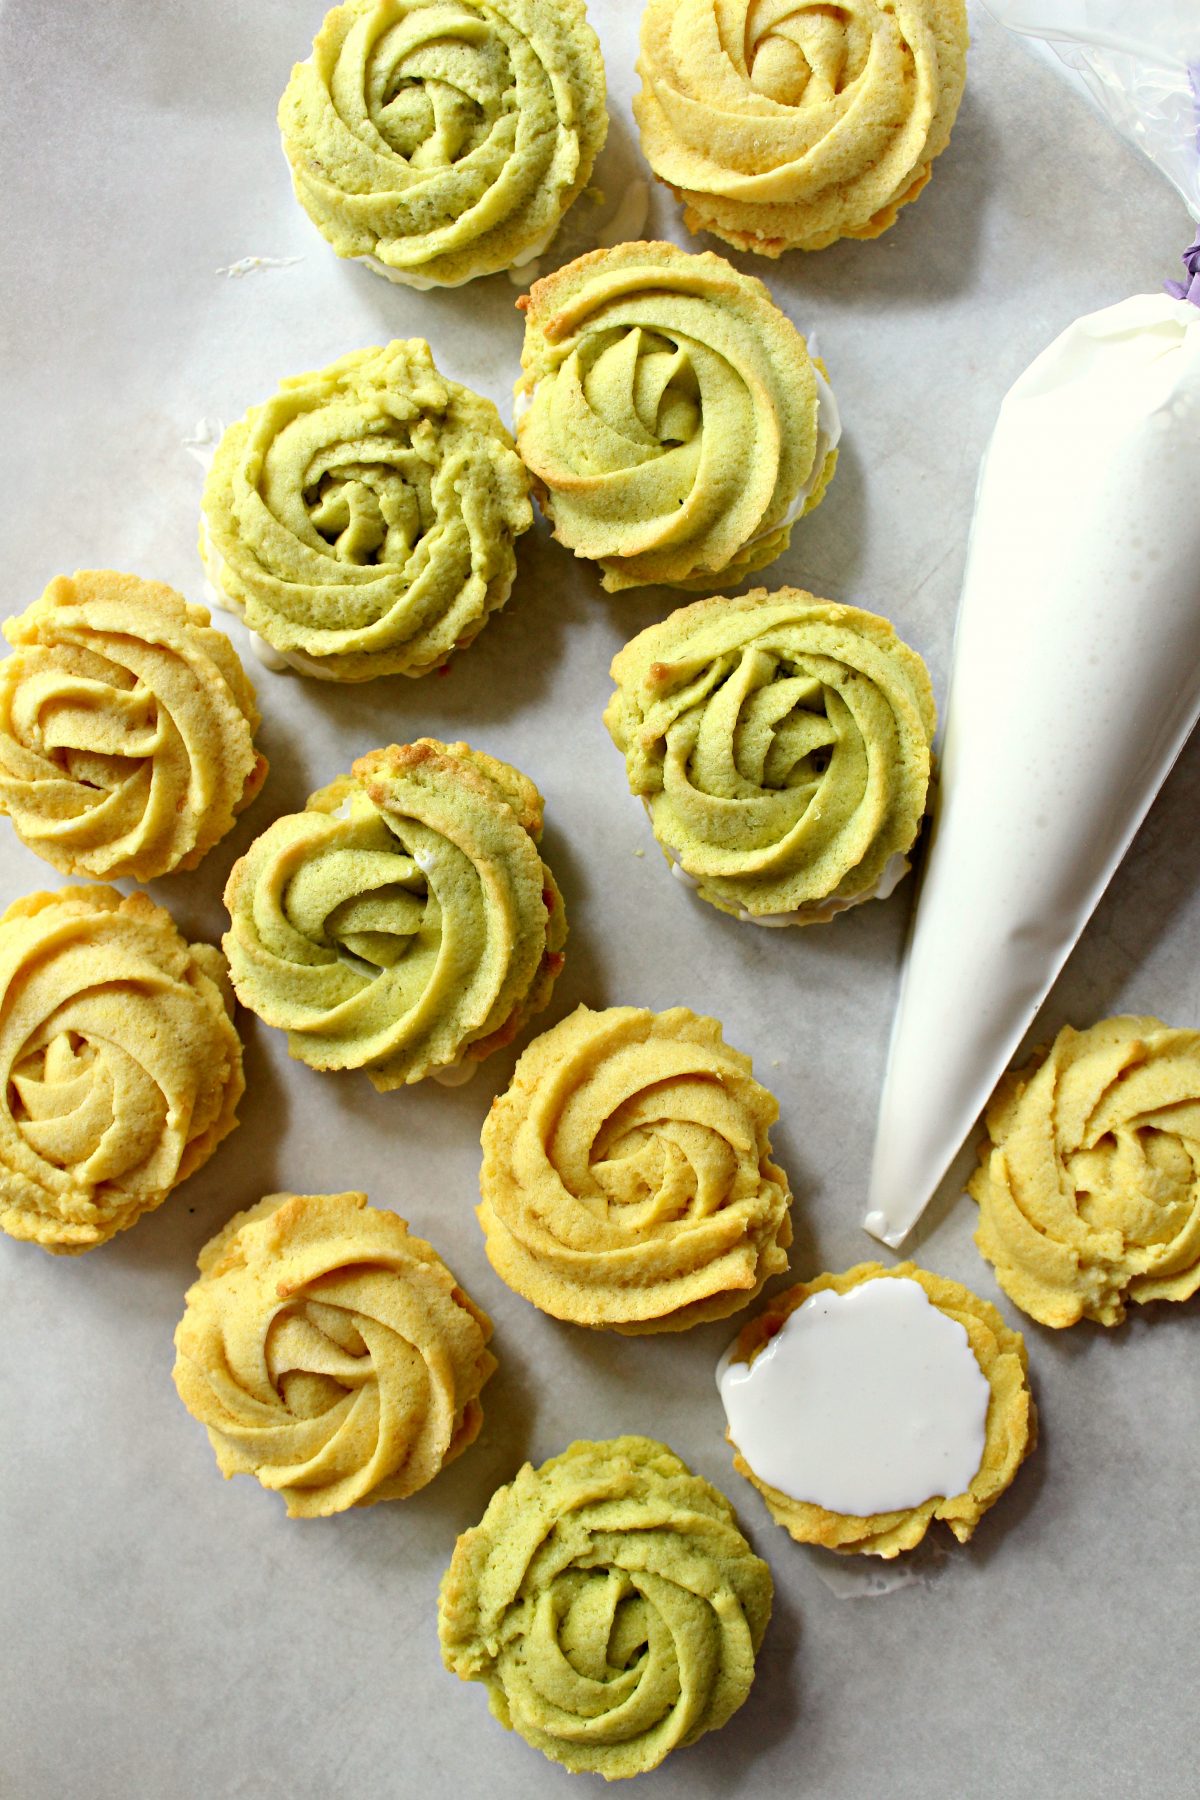 Lemon and Lime Butter Cookie Rosettes on gray background with a piping bag of white icing.